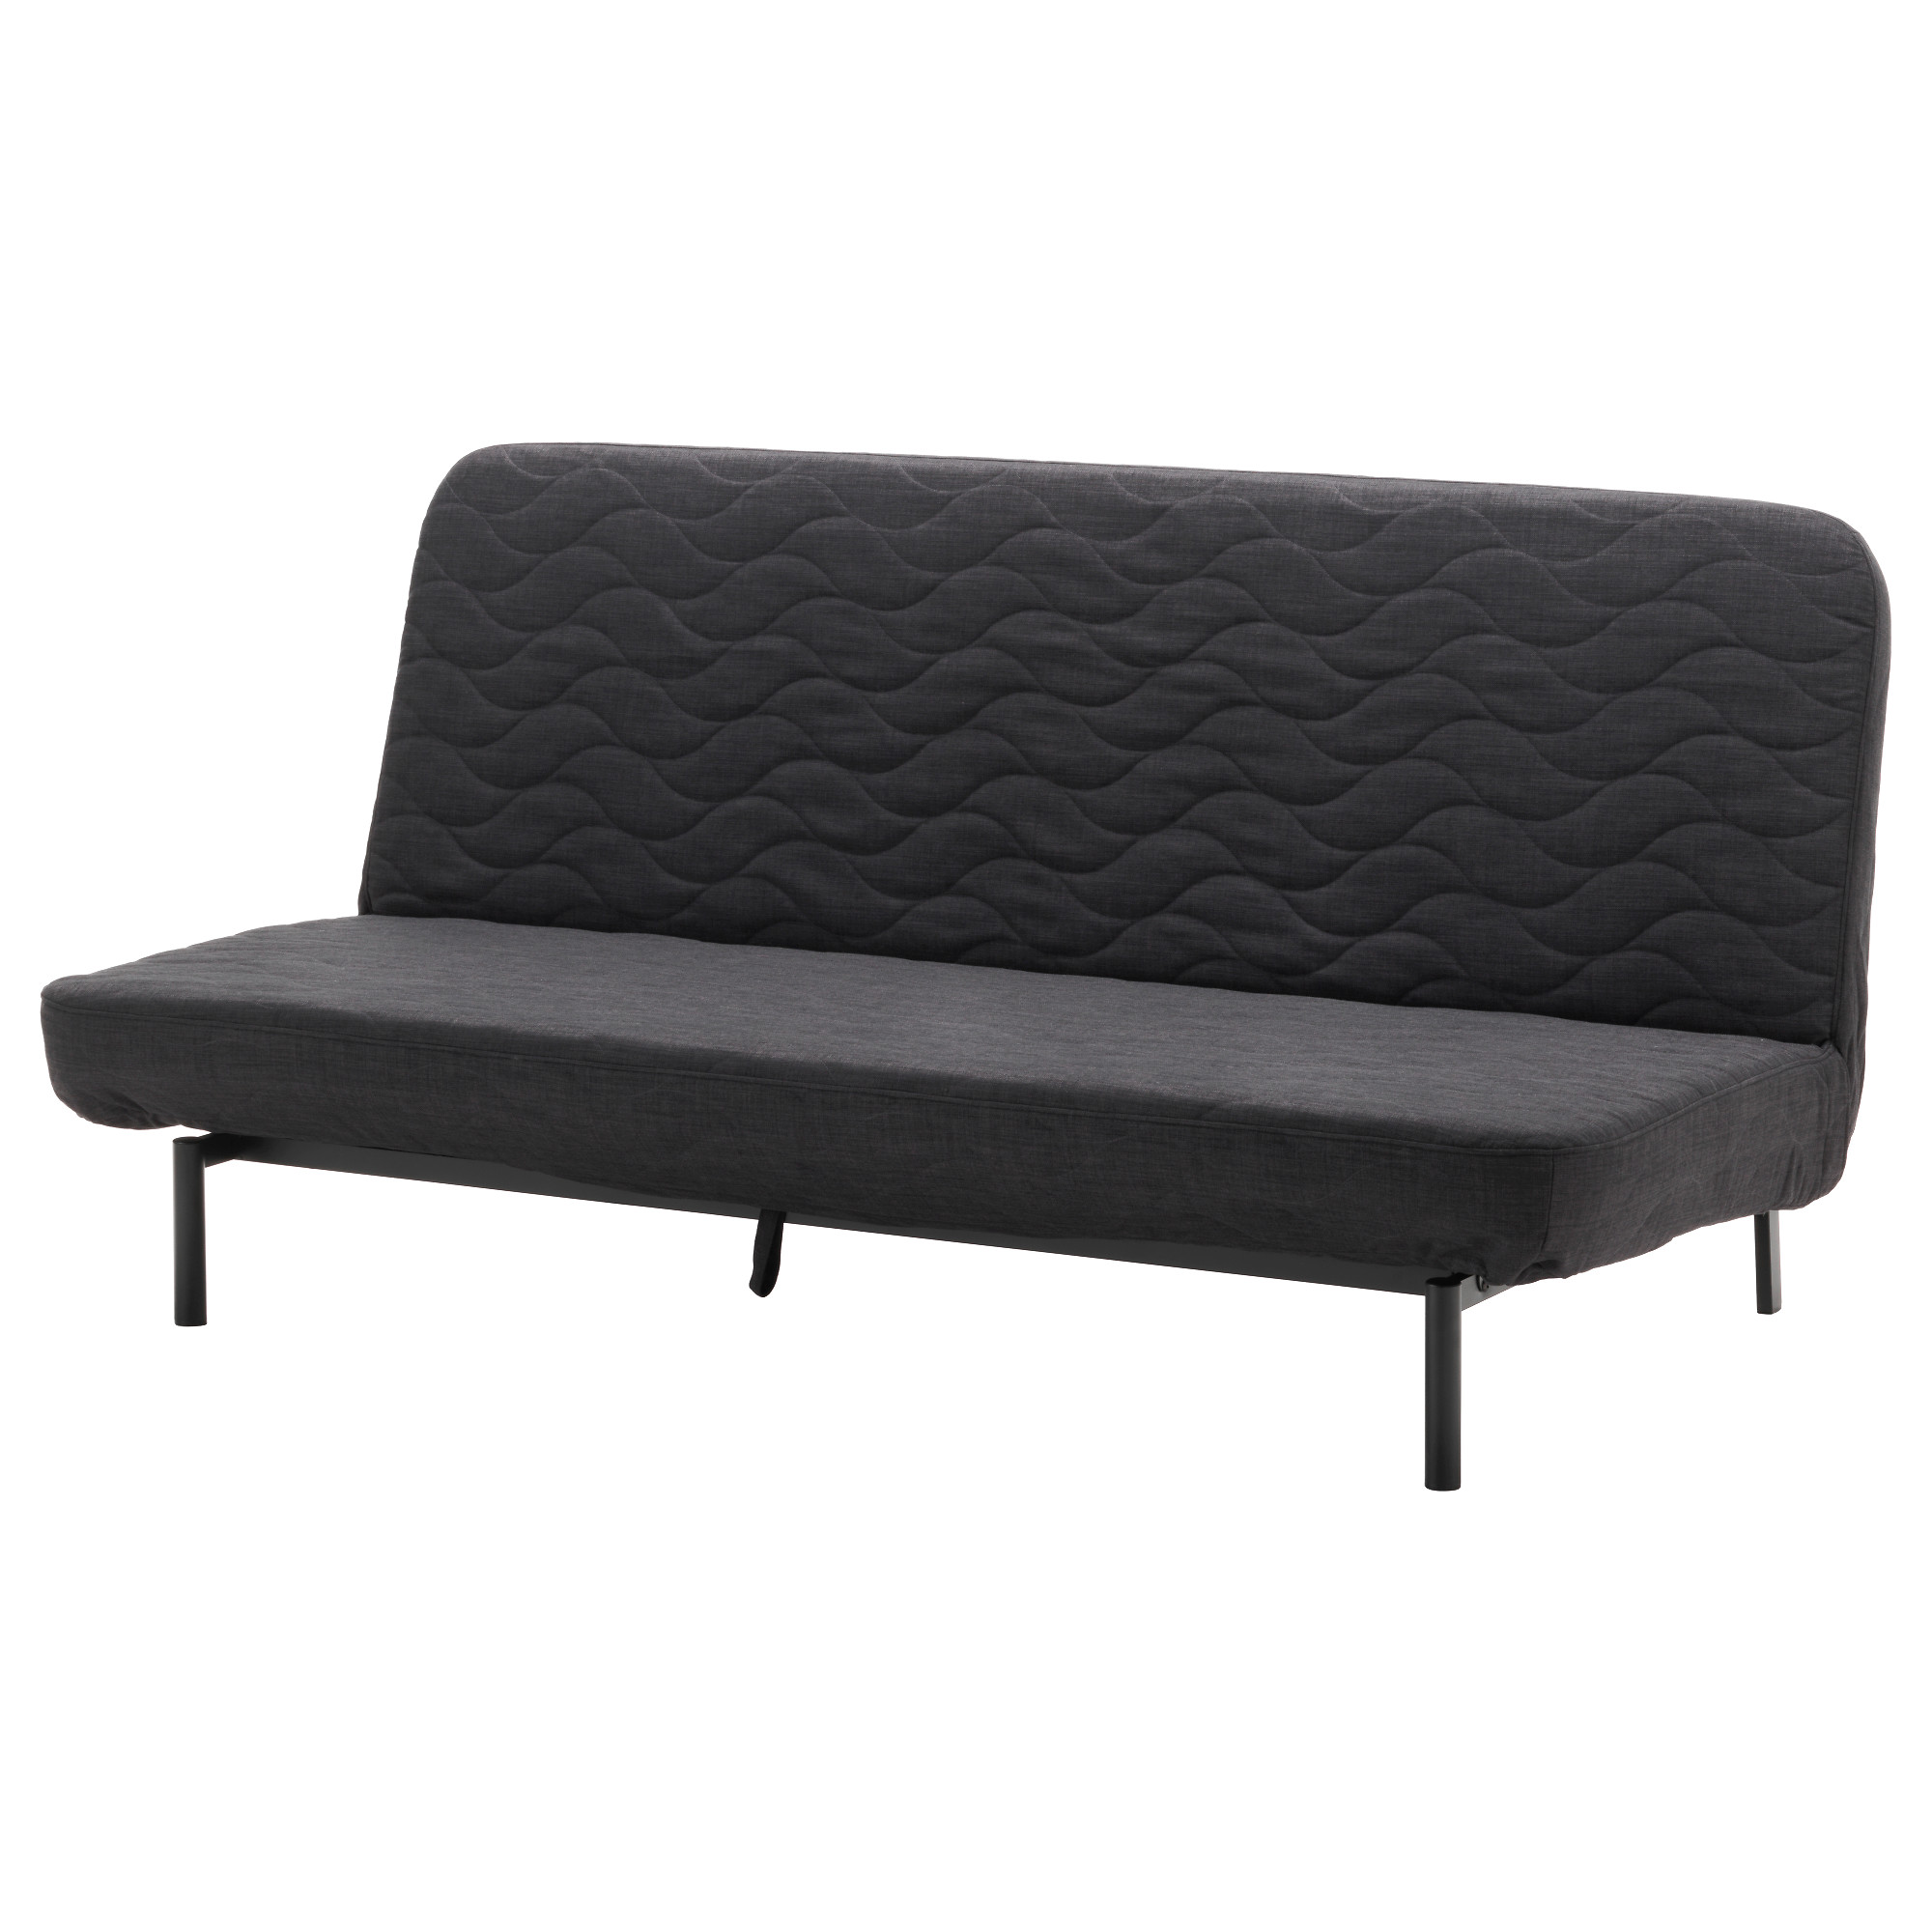 NYHAMN threeseat sofabed cover, Skiftebo anthracite